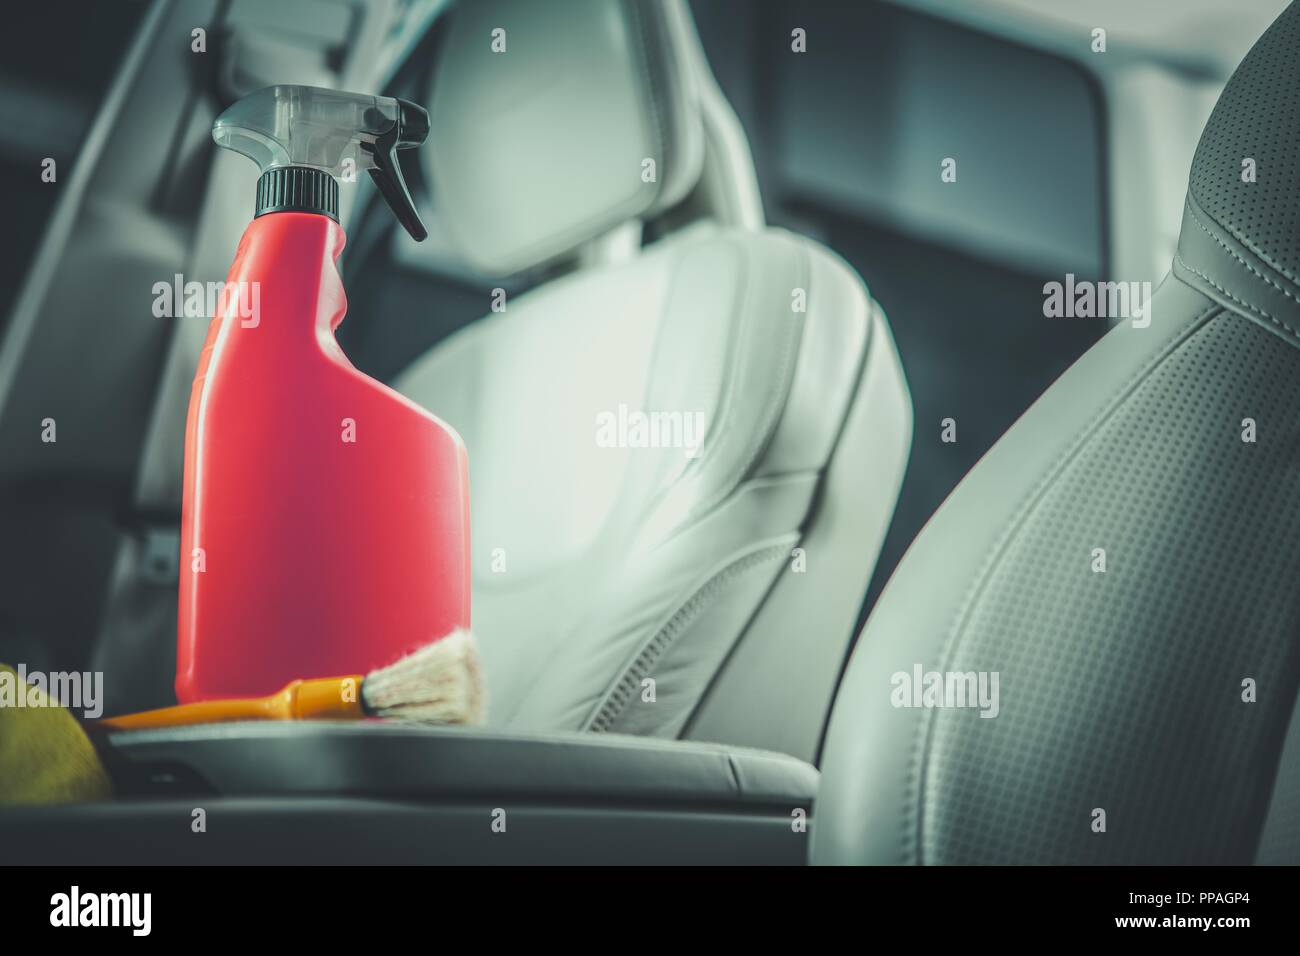 Car Leather Cleaning Detergent in the Orange Red Bottle. Modern Vehicle Interior with Light Leather Finishing. Stock Photo